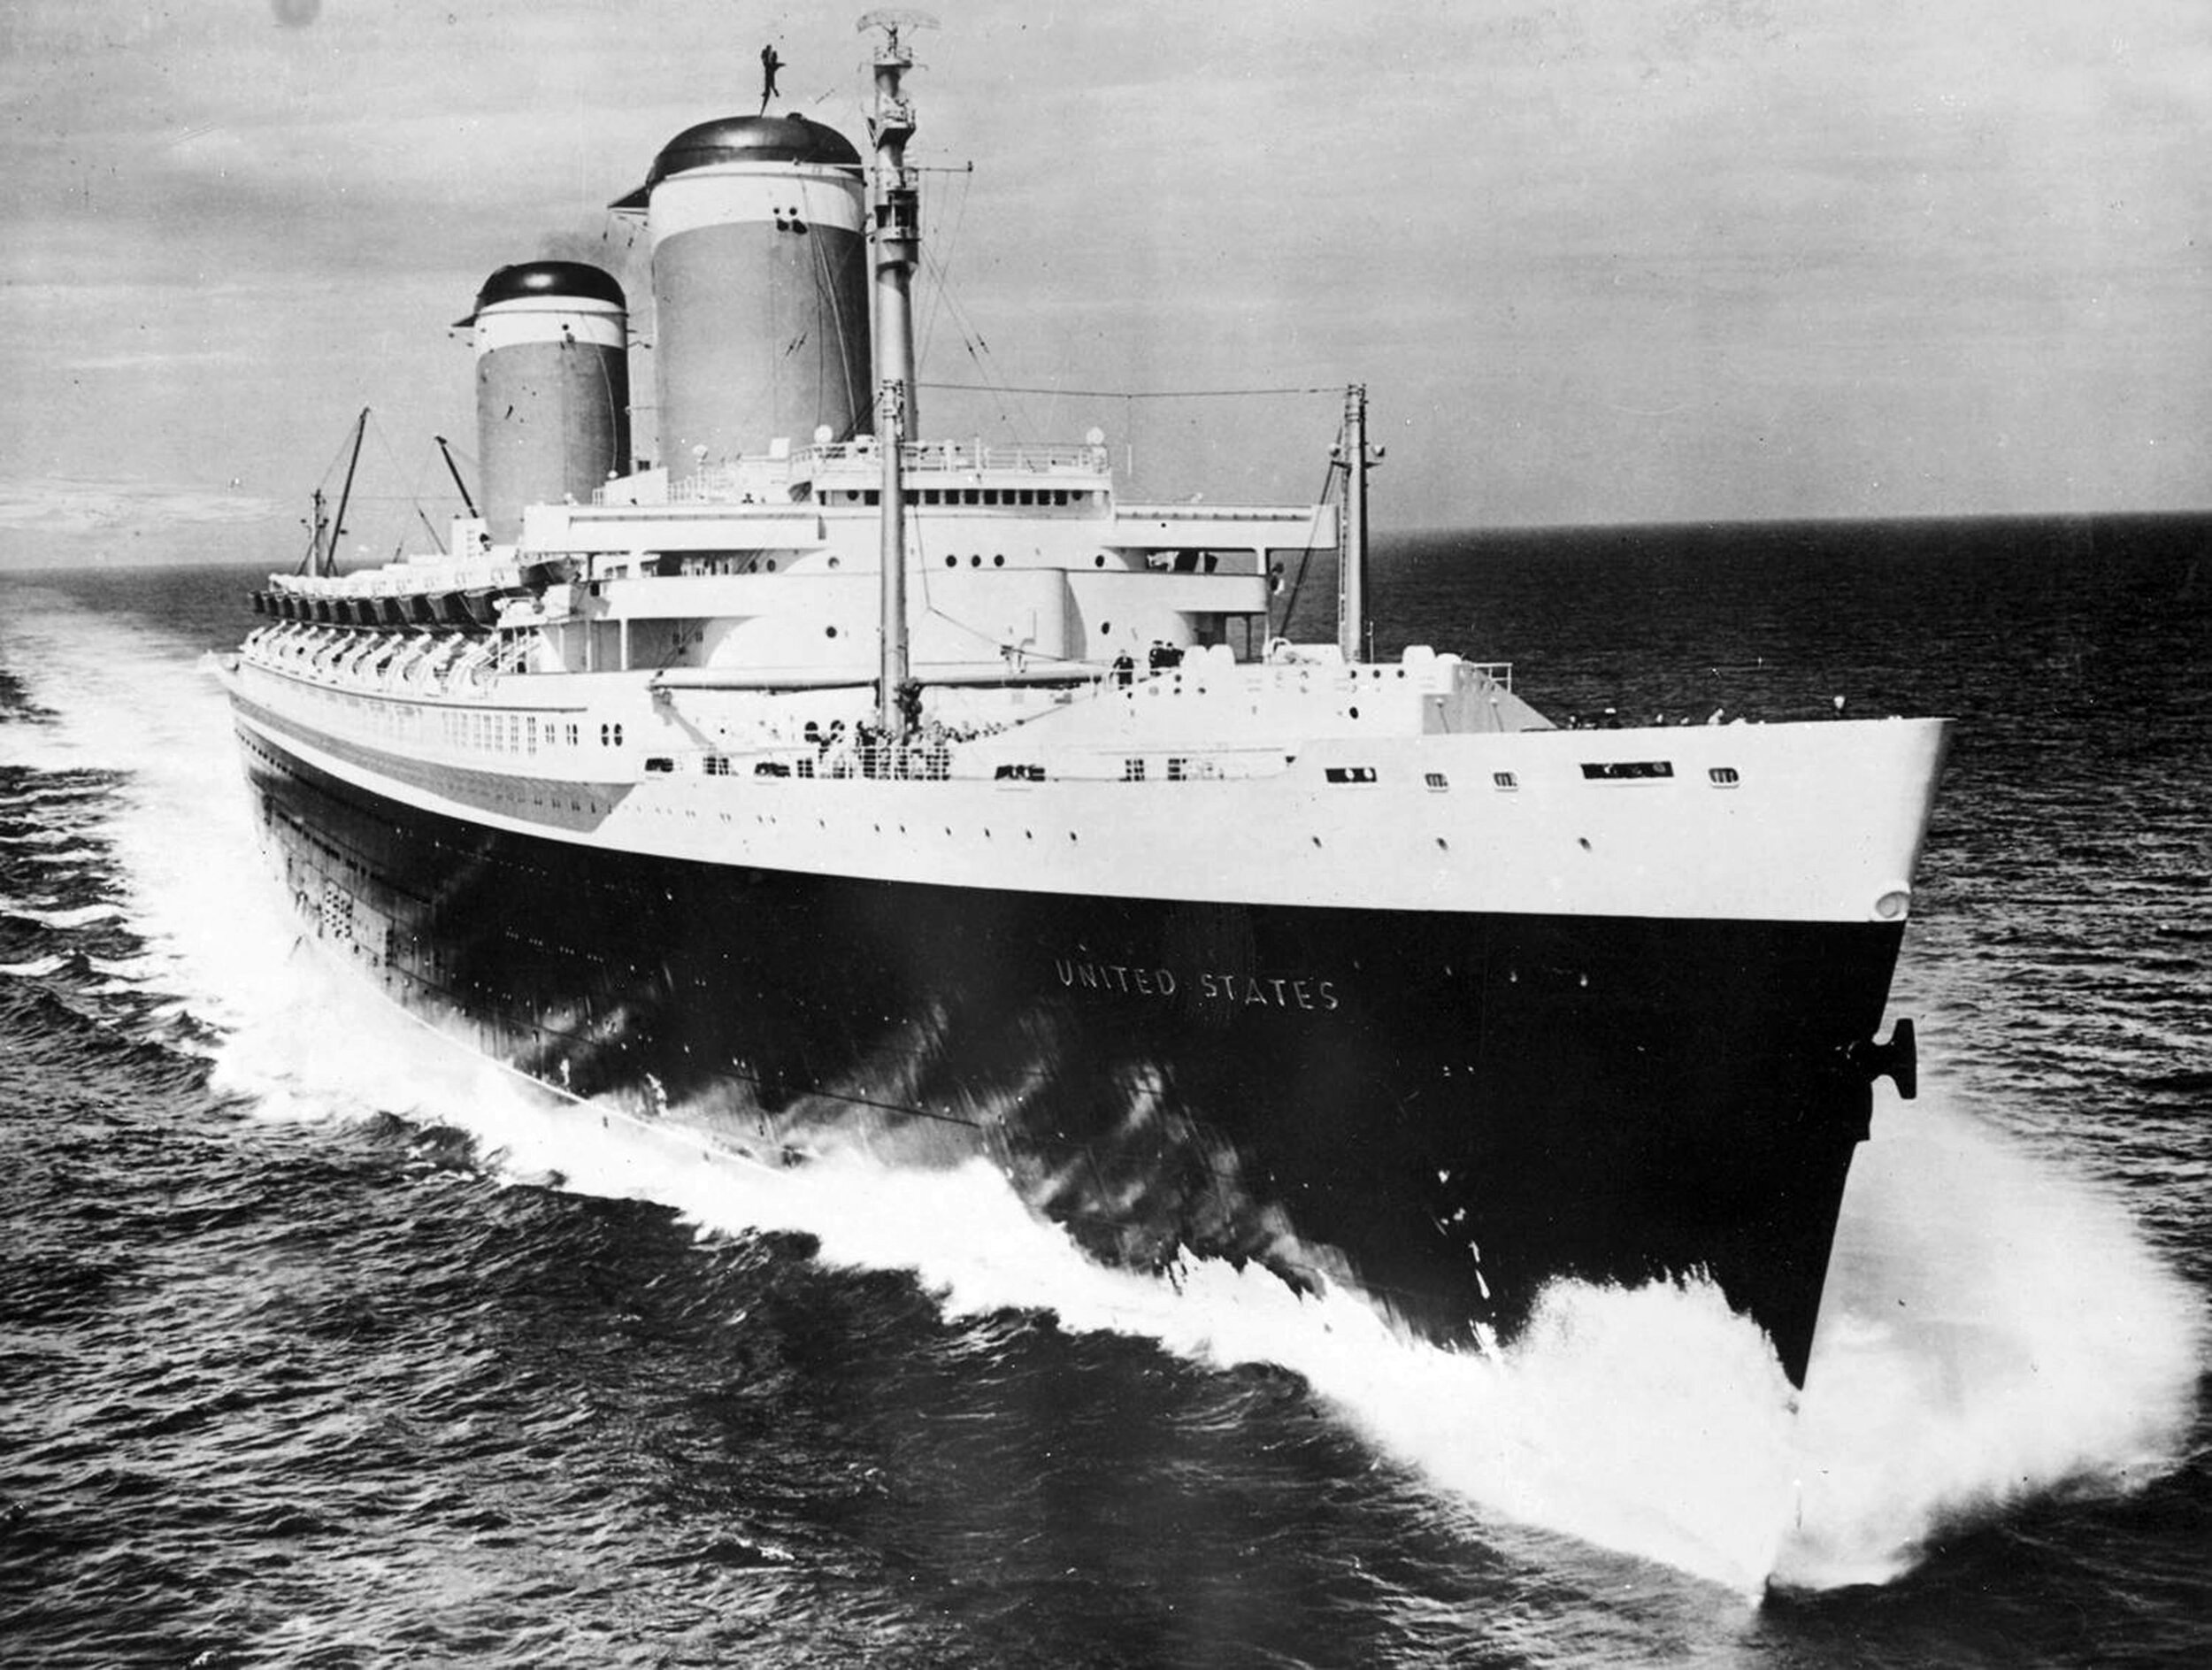 The SS United States traveling at excess of 38 knots — over 44 miles per hour — on her sea trial (Image courtesy of Charles Anderson)